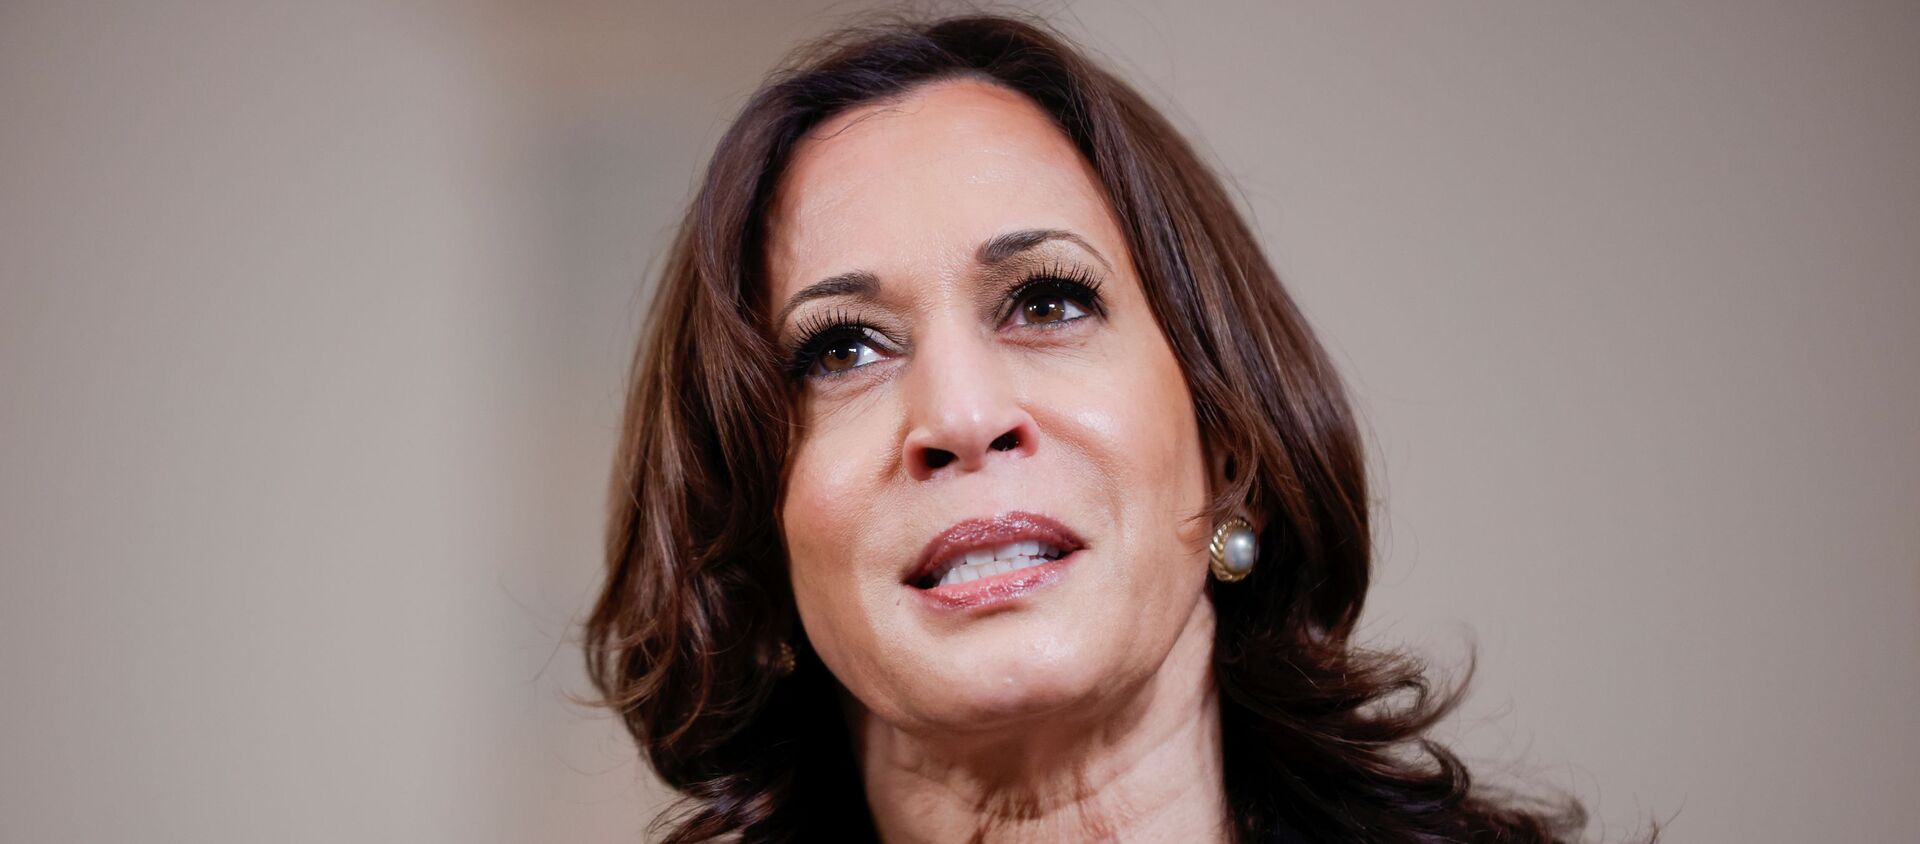 U.S. Vice President Kamala Harris speaks after a jury reached guilty verdicts in the murder trial of former Minneapolis police officer Derek Chauvin stemming from George Floyd's deadly arrest, in the Cross Hall at the White House in Washington, U.S., April 20, 2021. REUTERS/Tom Brenner/File Photo - Sputnik International, 1920, 18.08.2021